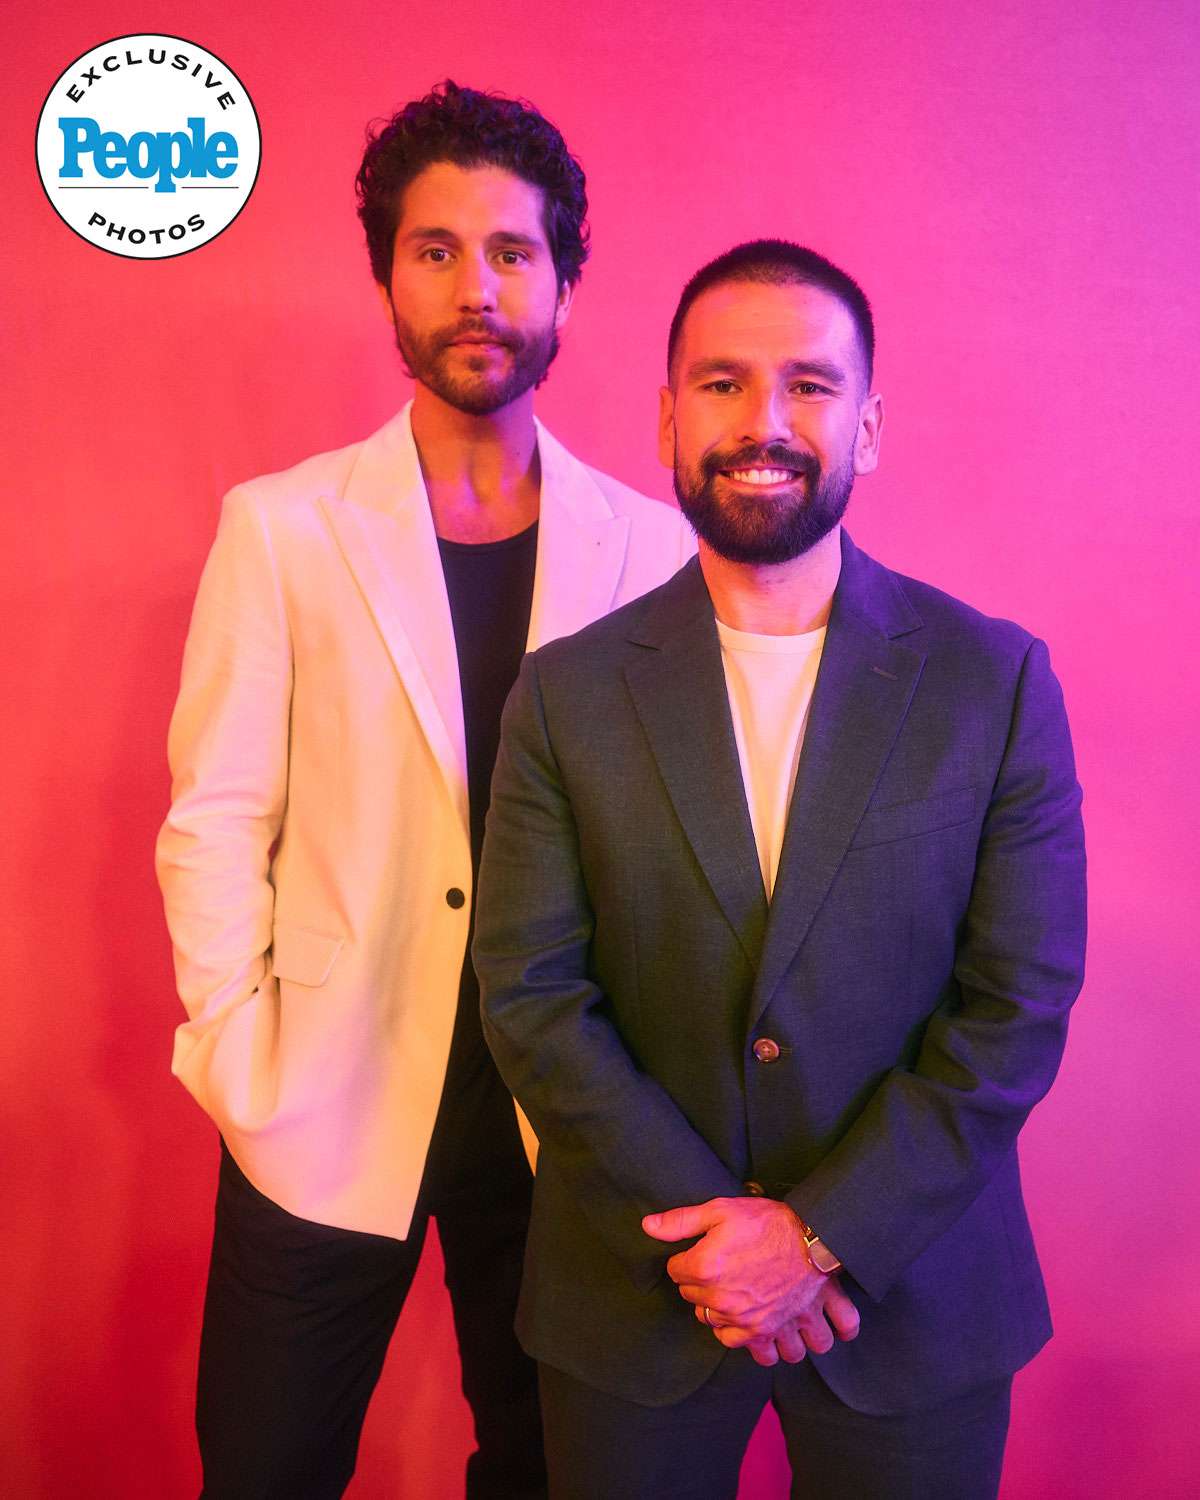 Dan + Shay attends the People photo booth at the 2024 ACM awards